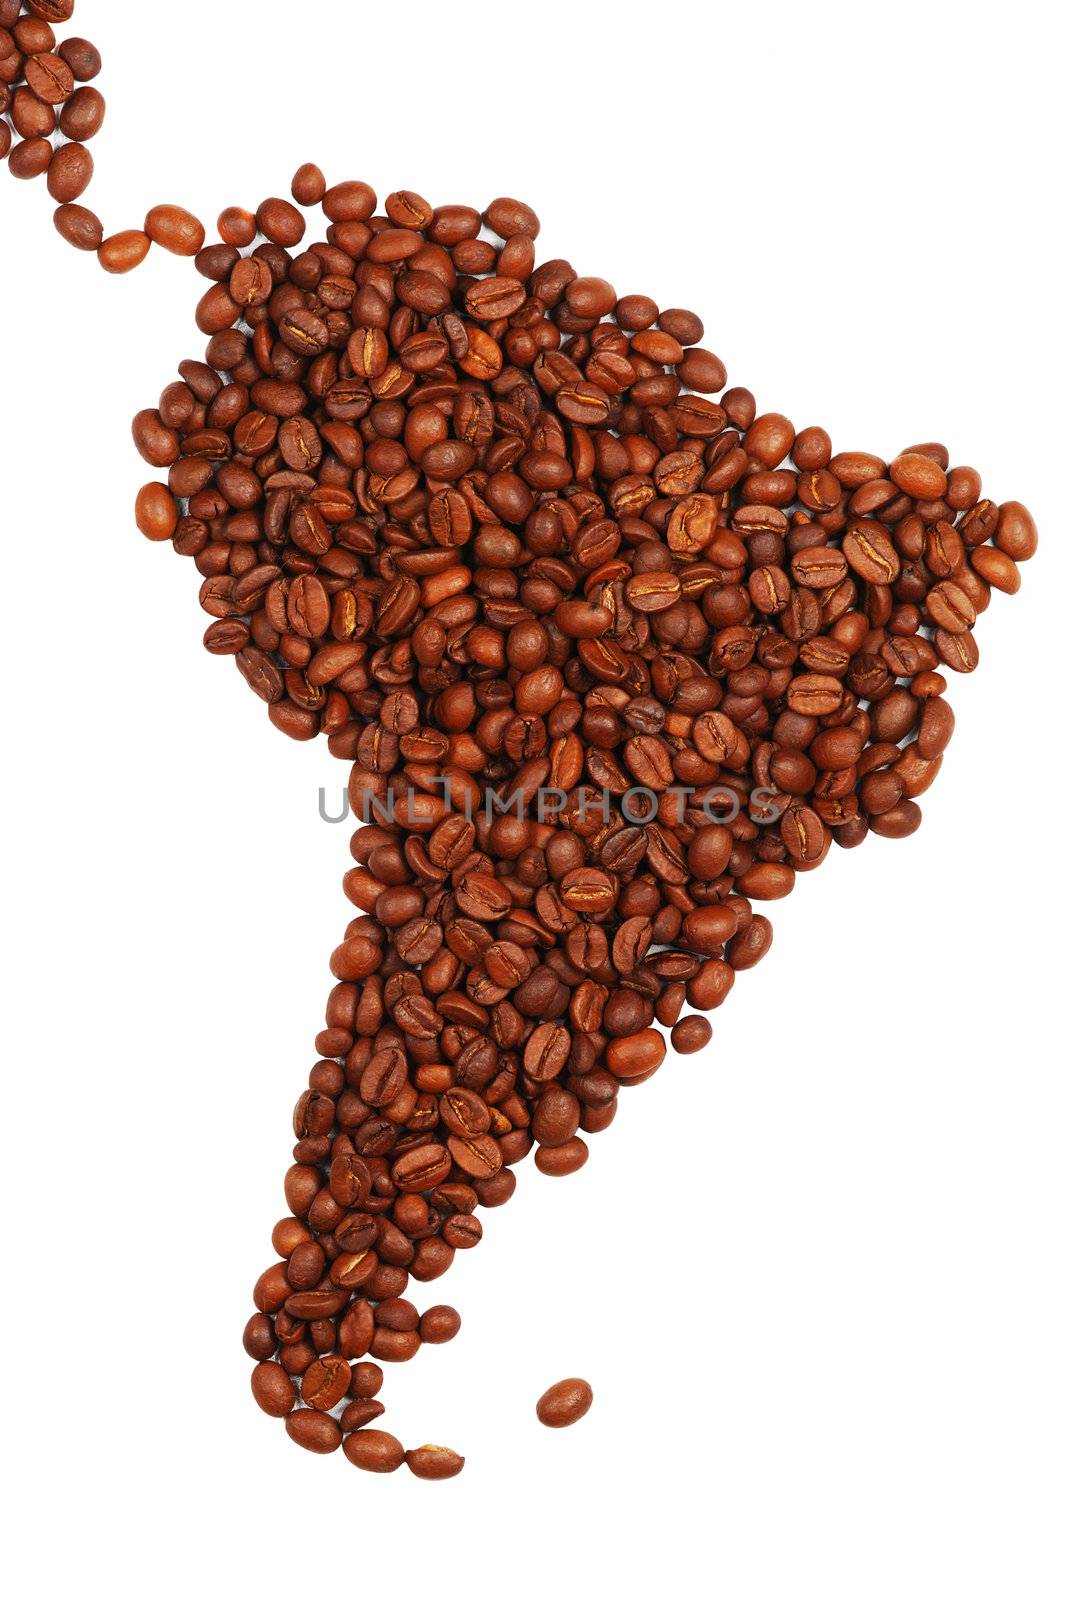 South America made with coffee by haveseen